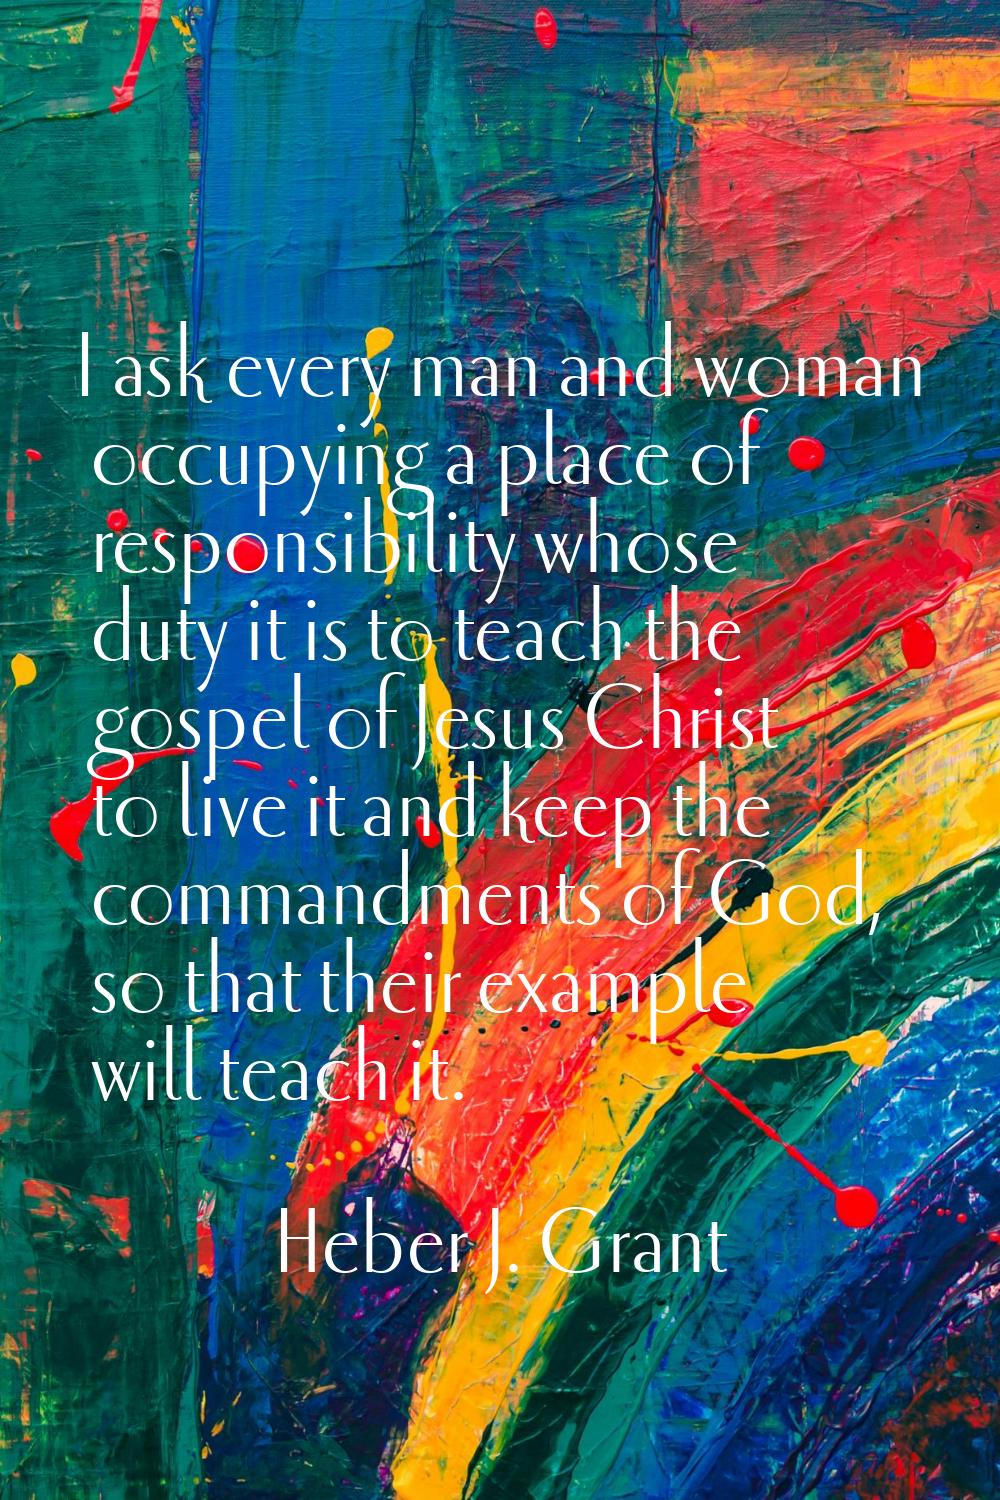 I ask every man and woman occupying a place of responsibility whose duty it is to teach the gospel 